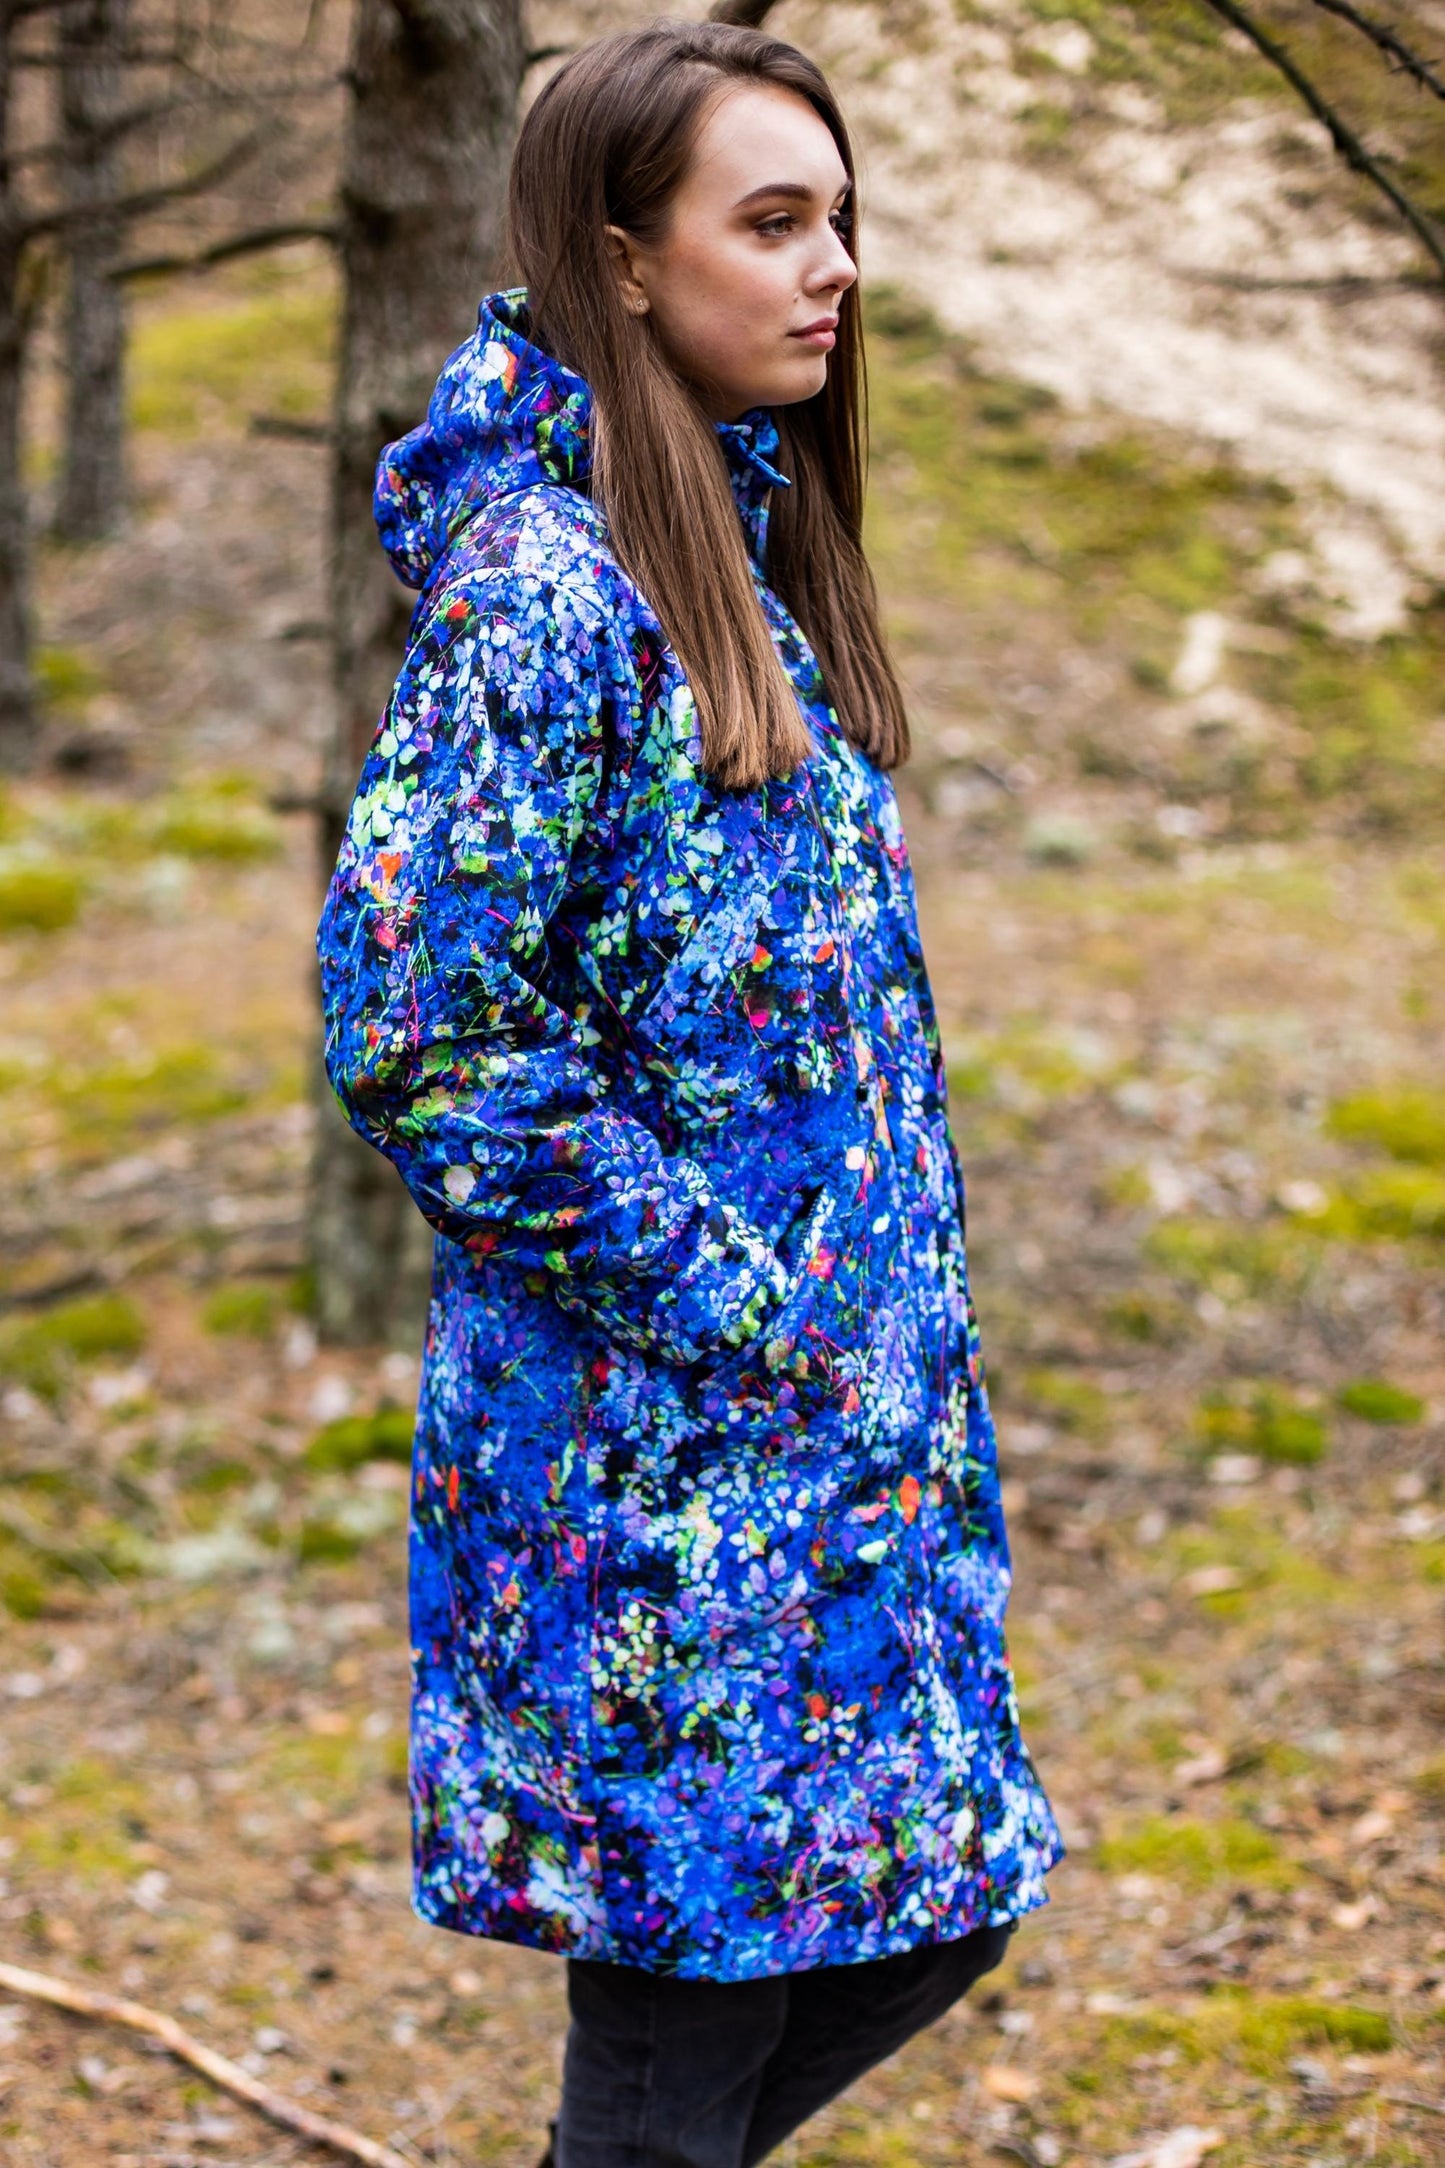 Softshell coat / parka with abstract leaves print